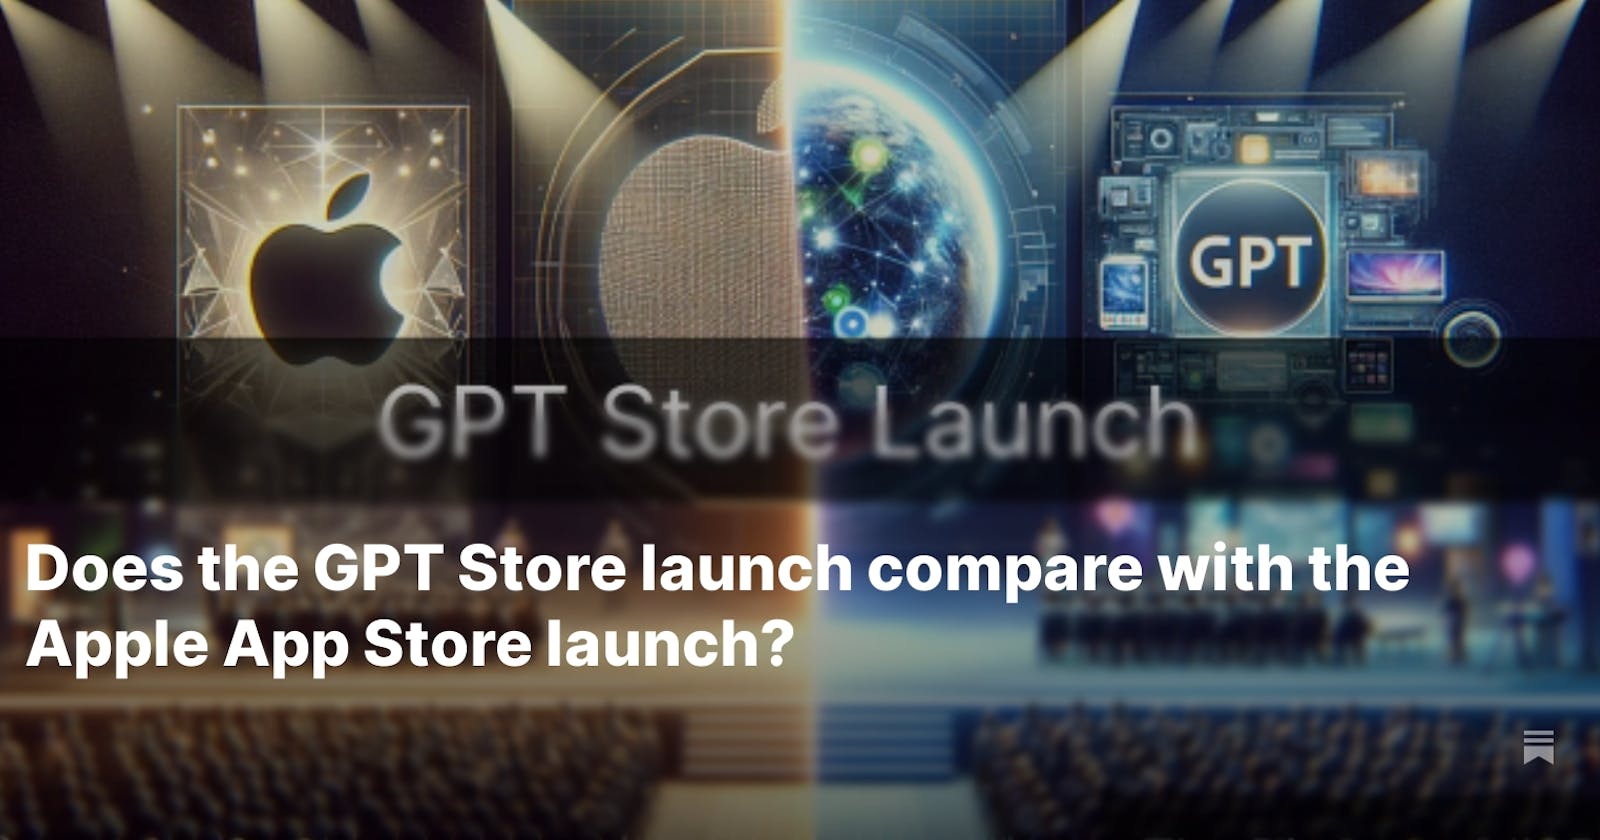 Does the GPT Store launch compare with the Apple App Store launch?